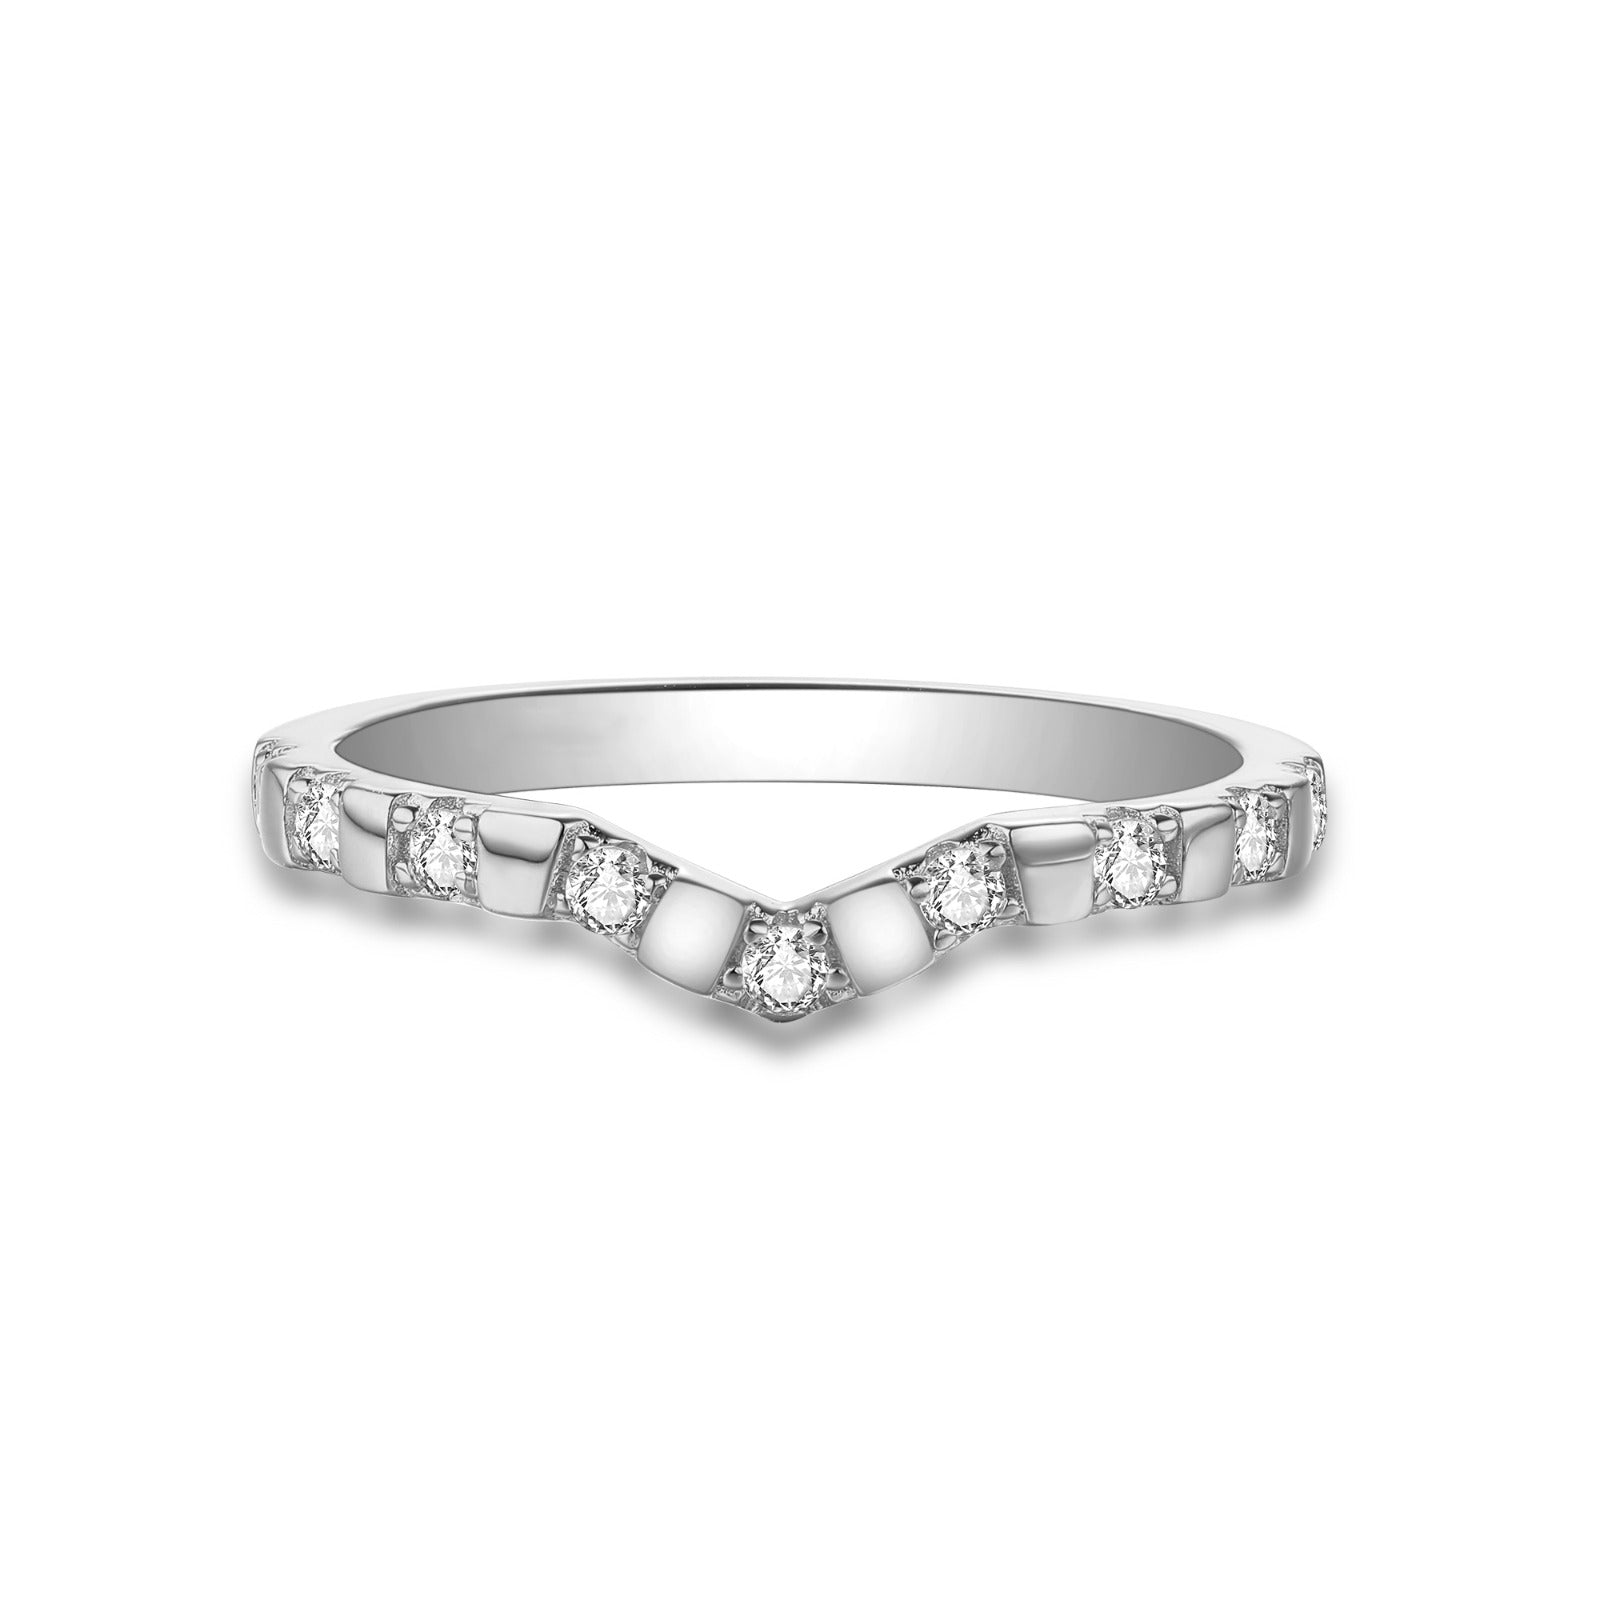 The Promise Ring Co. Connecting couples rings. A wishbone shape ring with unique diamond simulant band. In Sterling Silver.